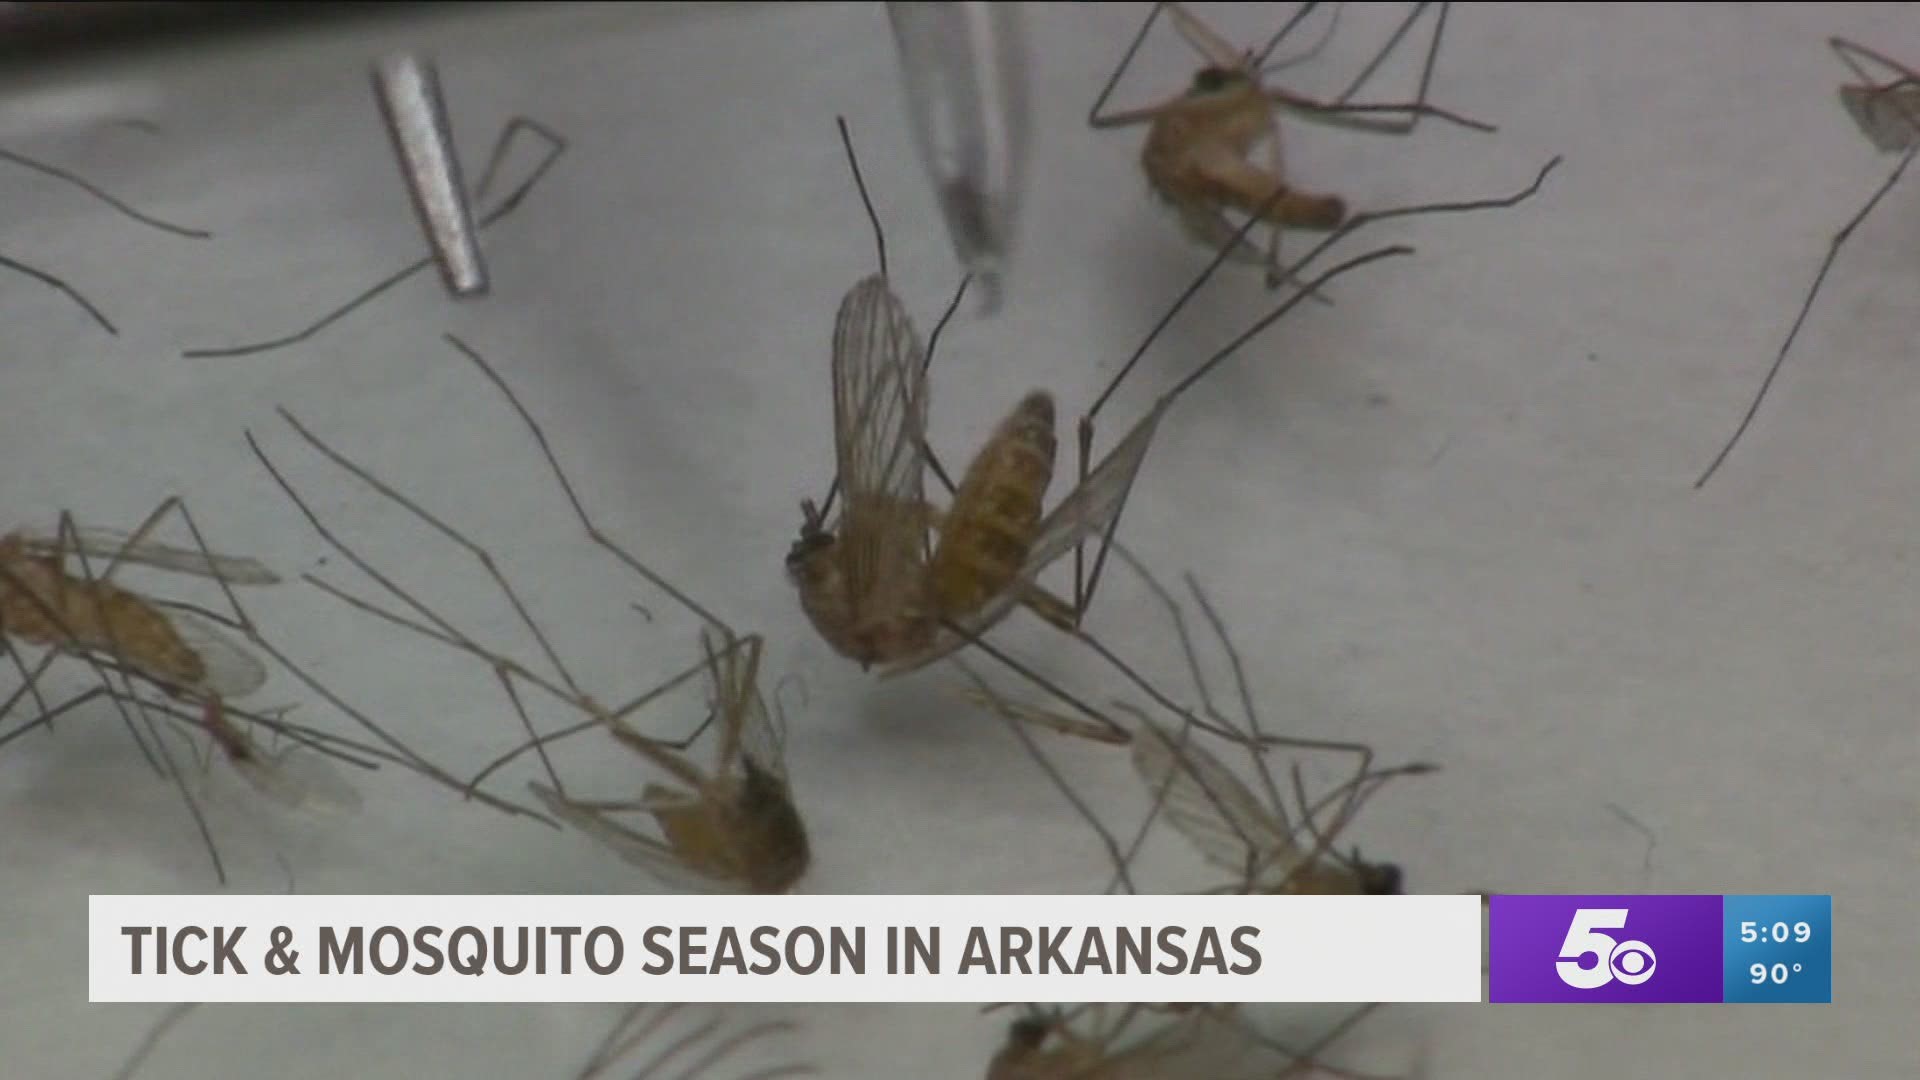 Arkansas has some of the highest rates in the nation for tick-borne diseases, and mosquitoes in Arkansas can carry West Nile Virus and other less common diseases.